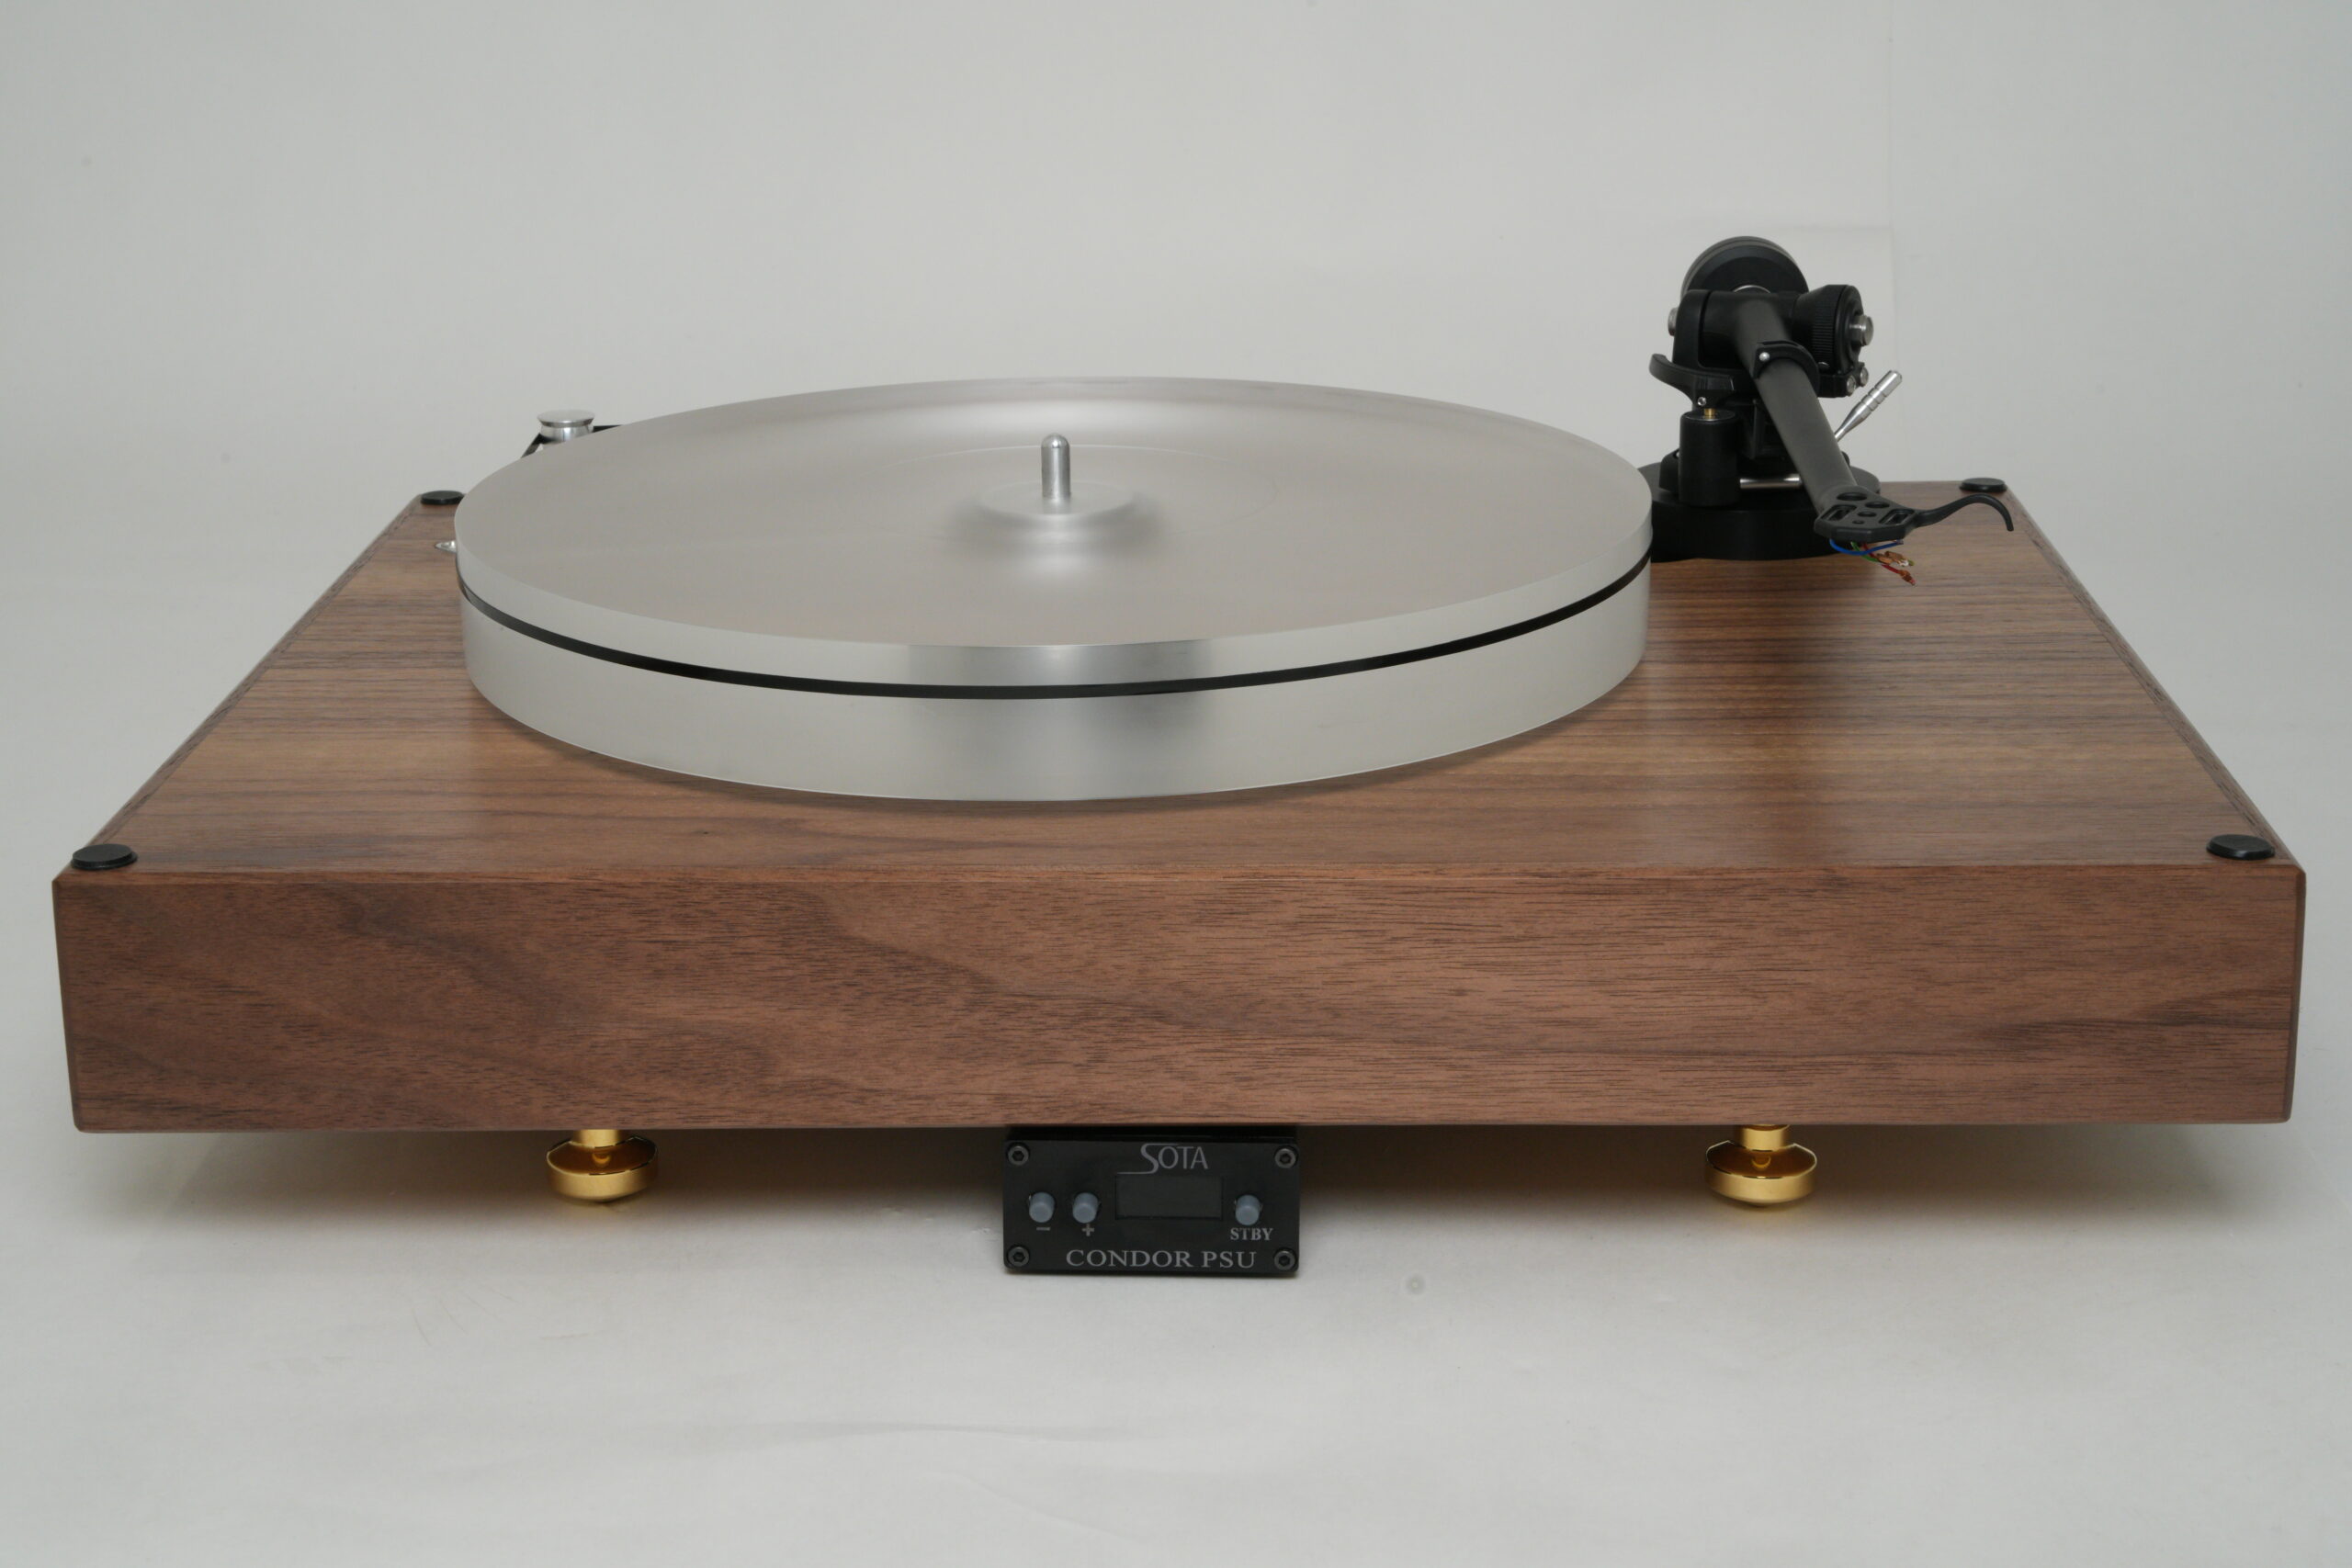 ‘Farm to turntable’: Wisconsin company builds and sells record players for up to $10K